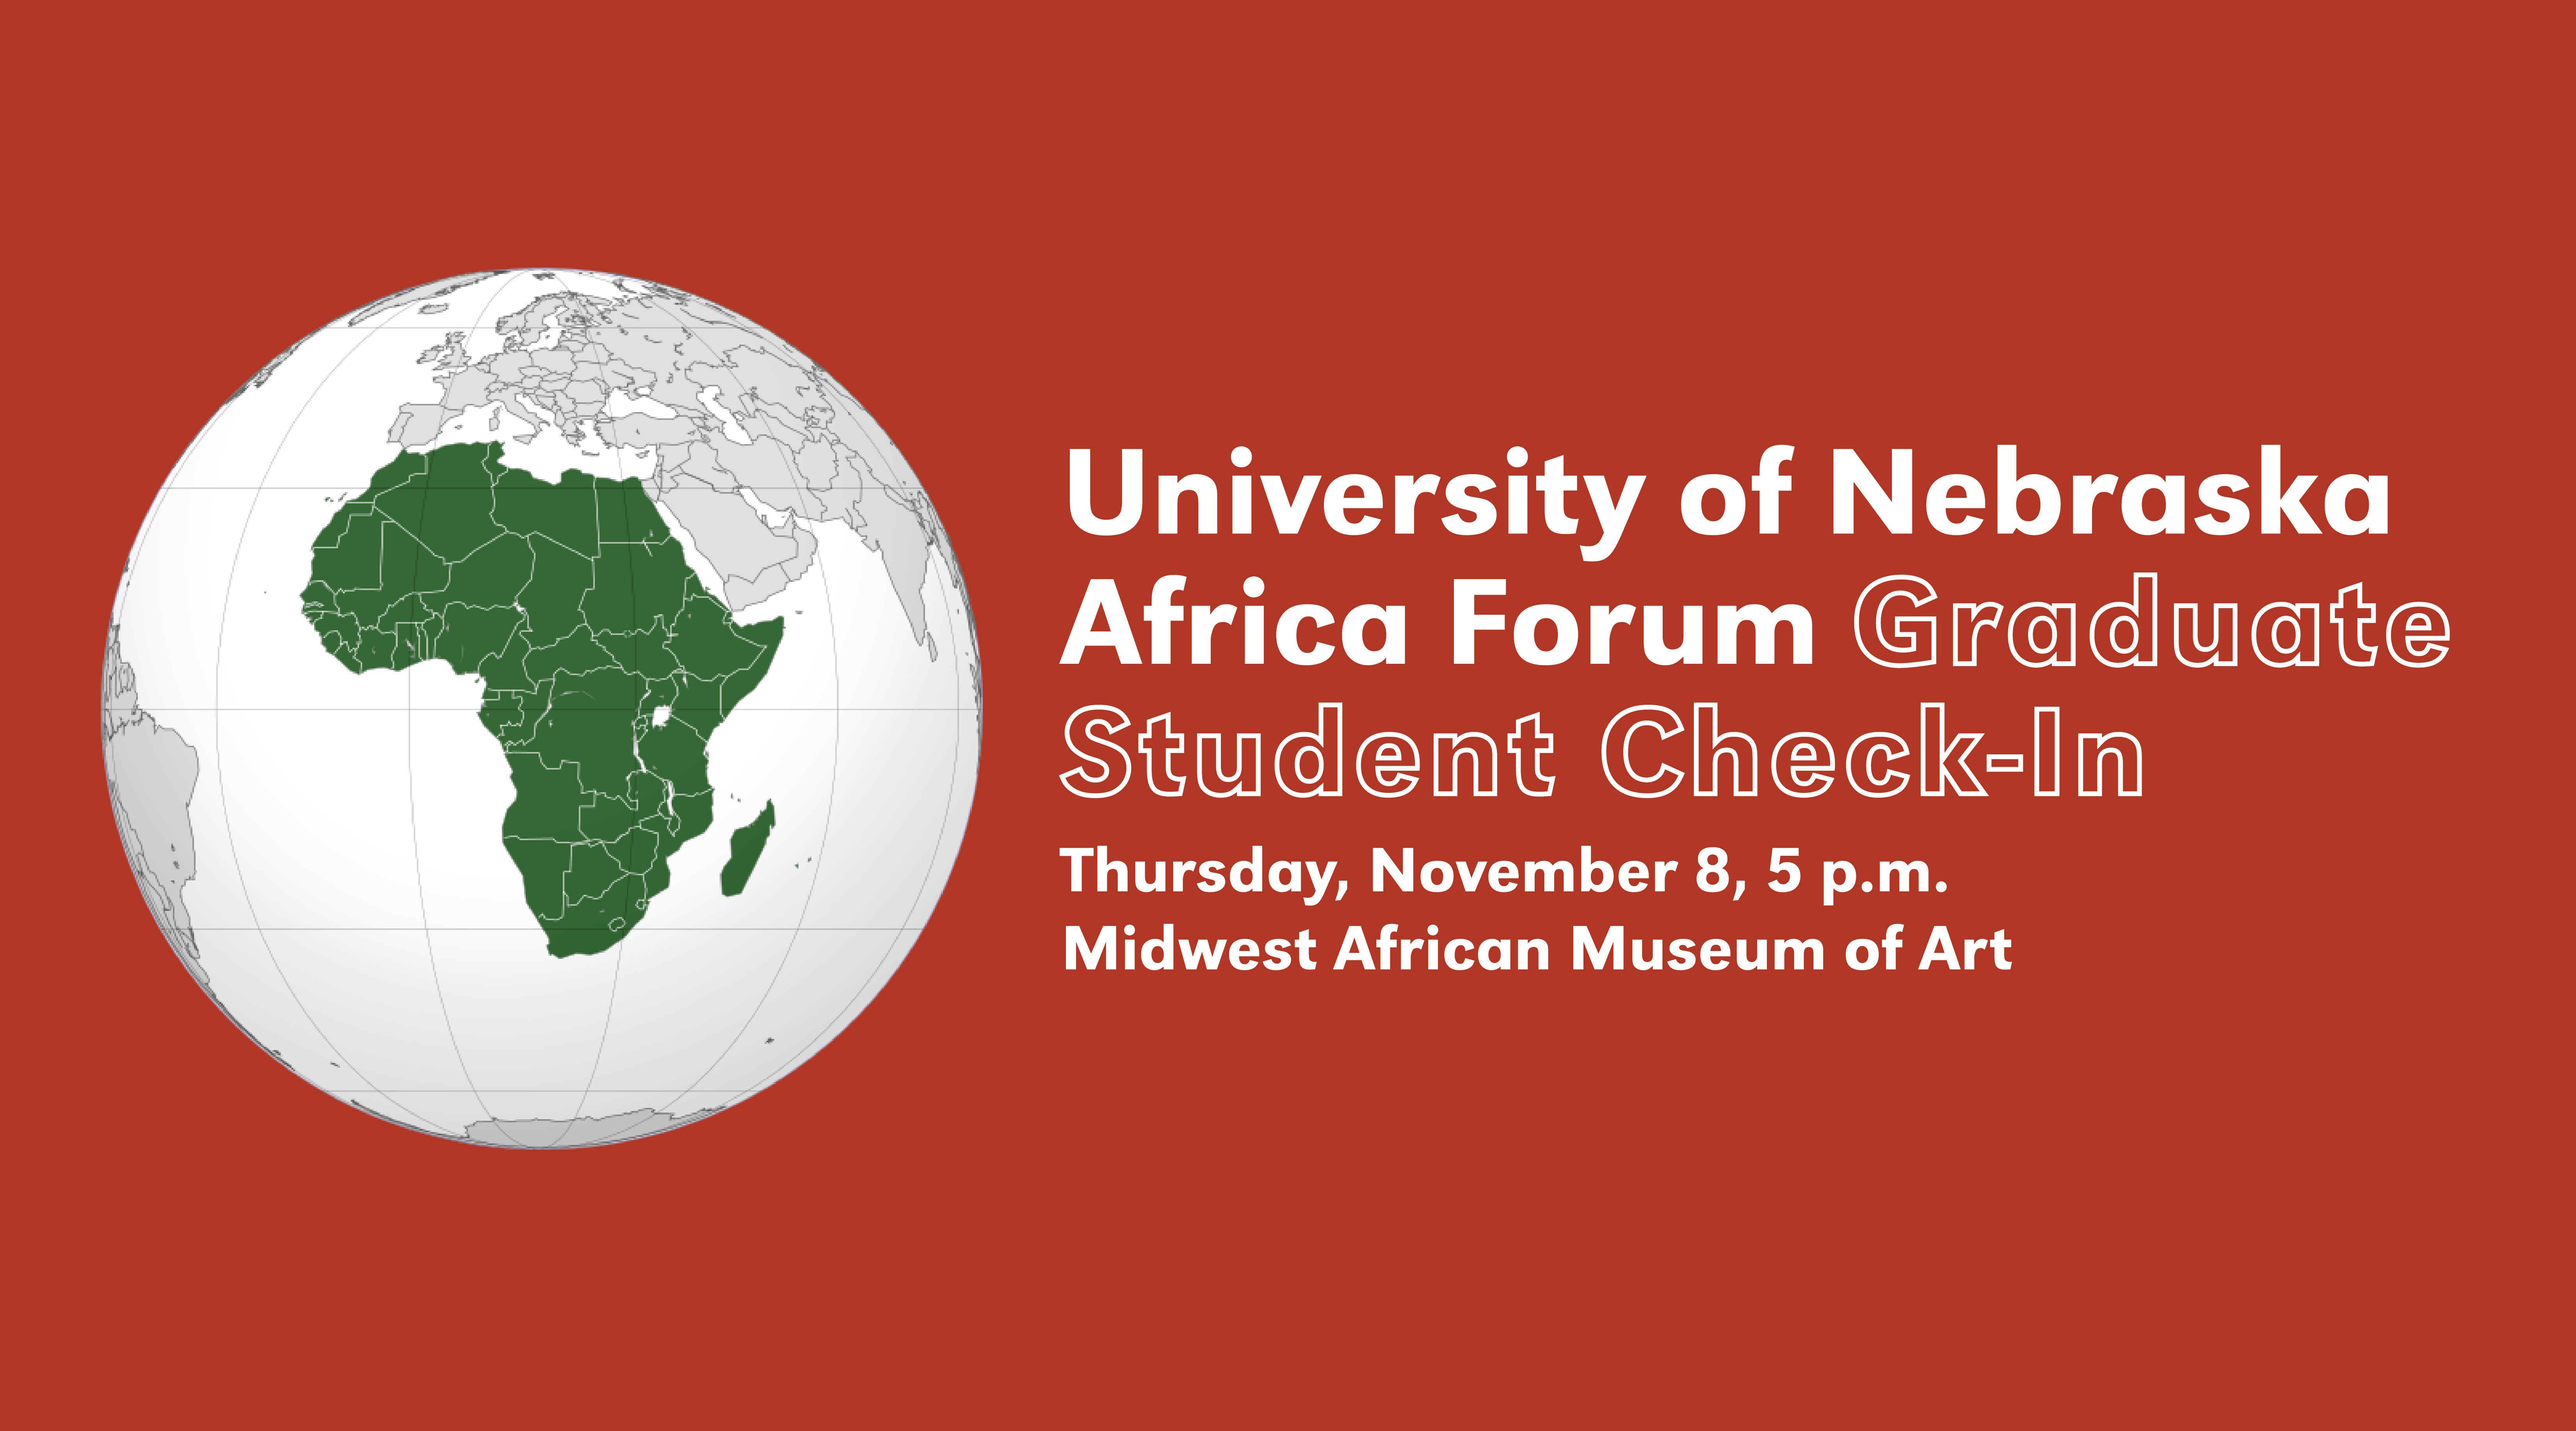 The University of Nebraska Africa Forum invites graduate students to a roundtable check-in on support systems, stress management, and finding a community.